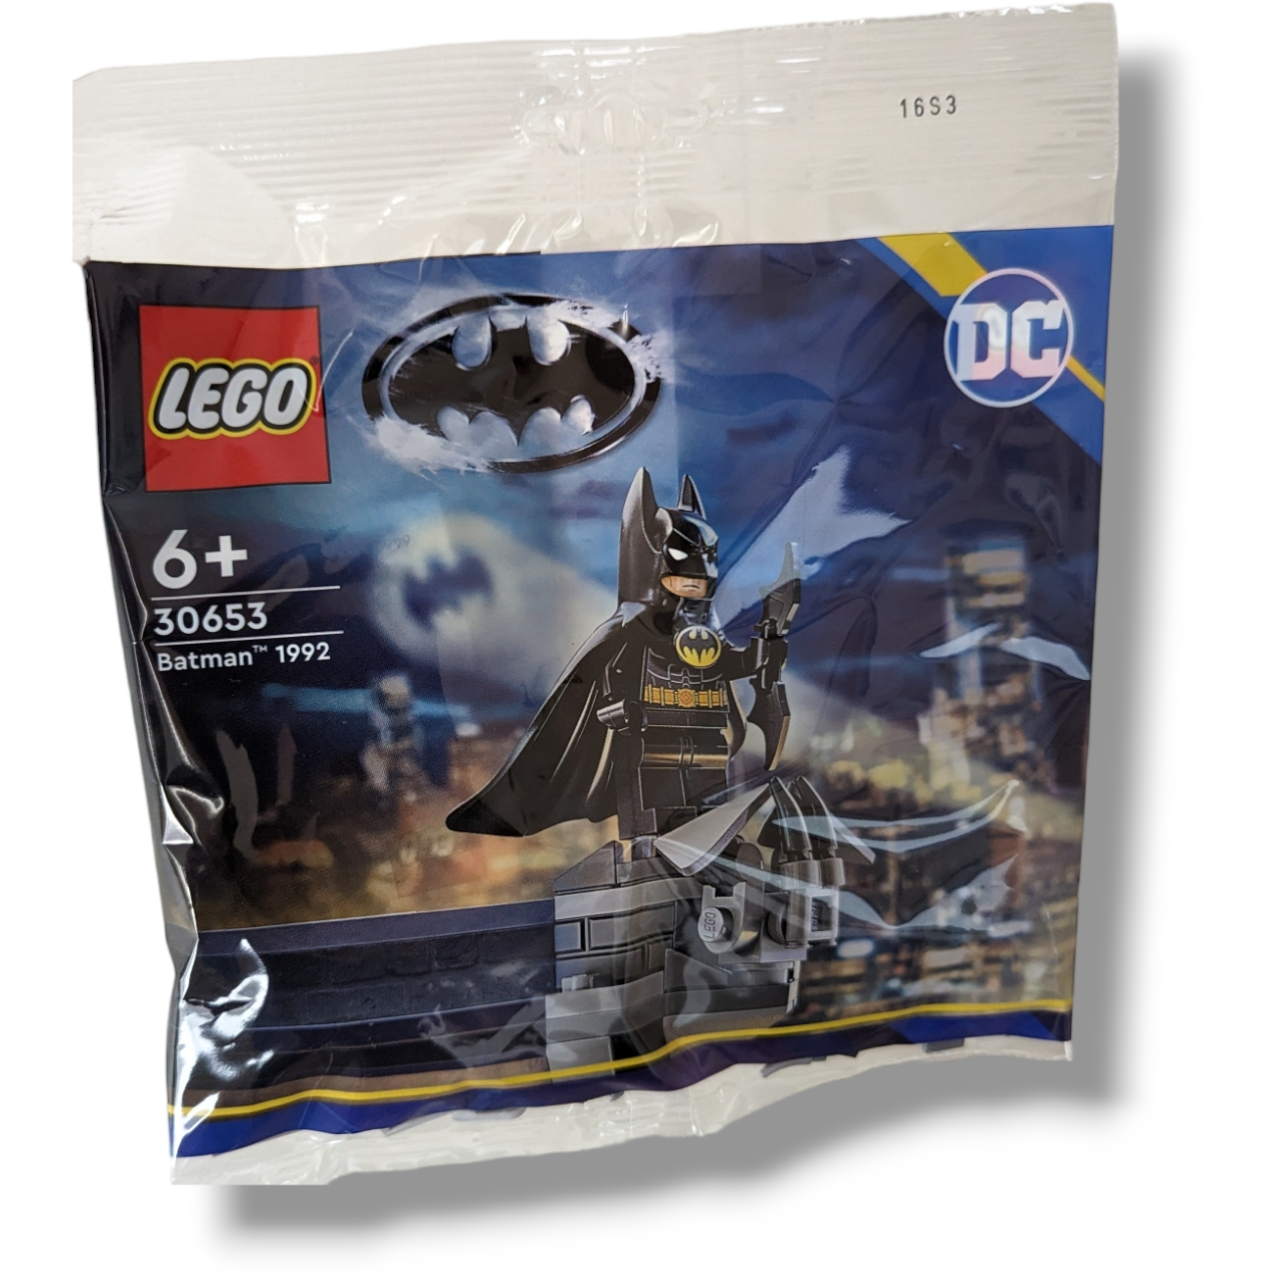 LEGO Polybags - Huge selection from various themes